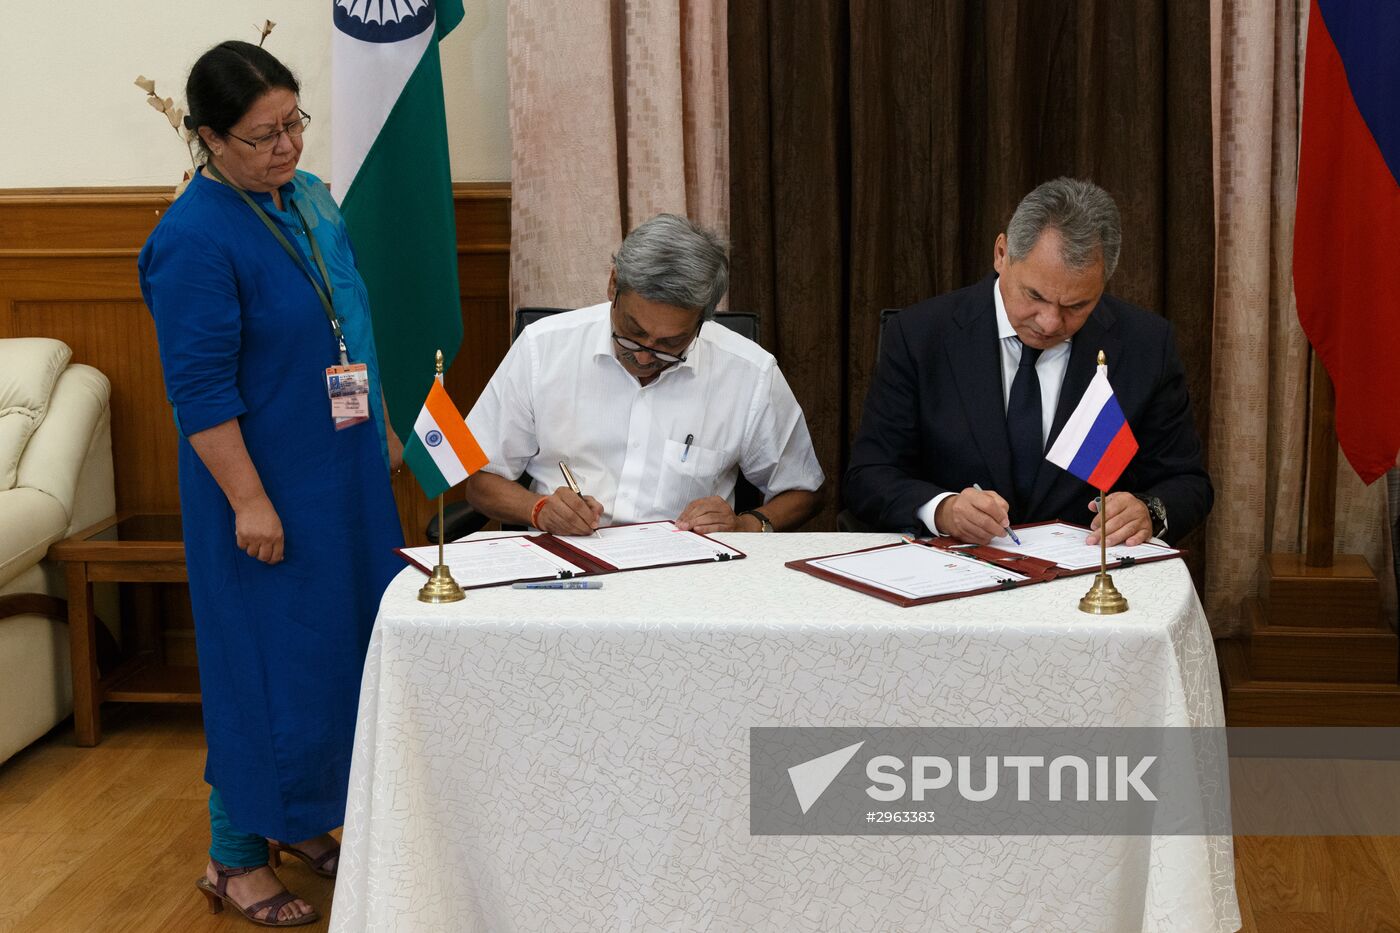 Defense Minister Sergei Shoigu arrives in India to discuss military and technical cooperation